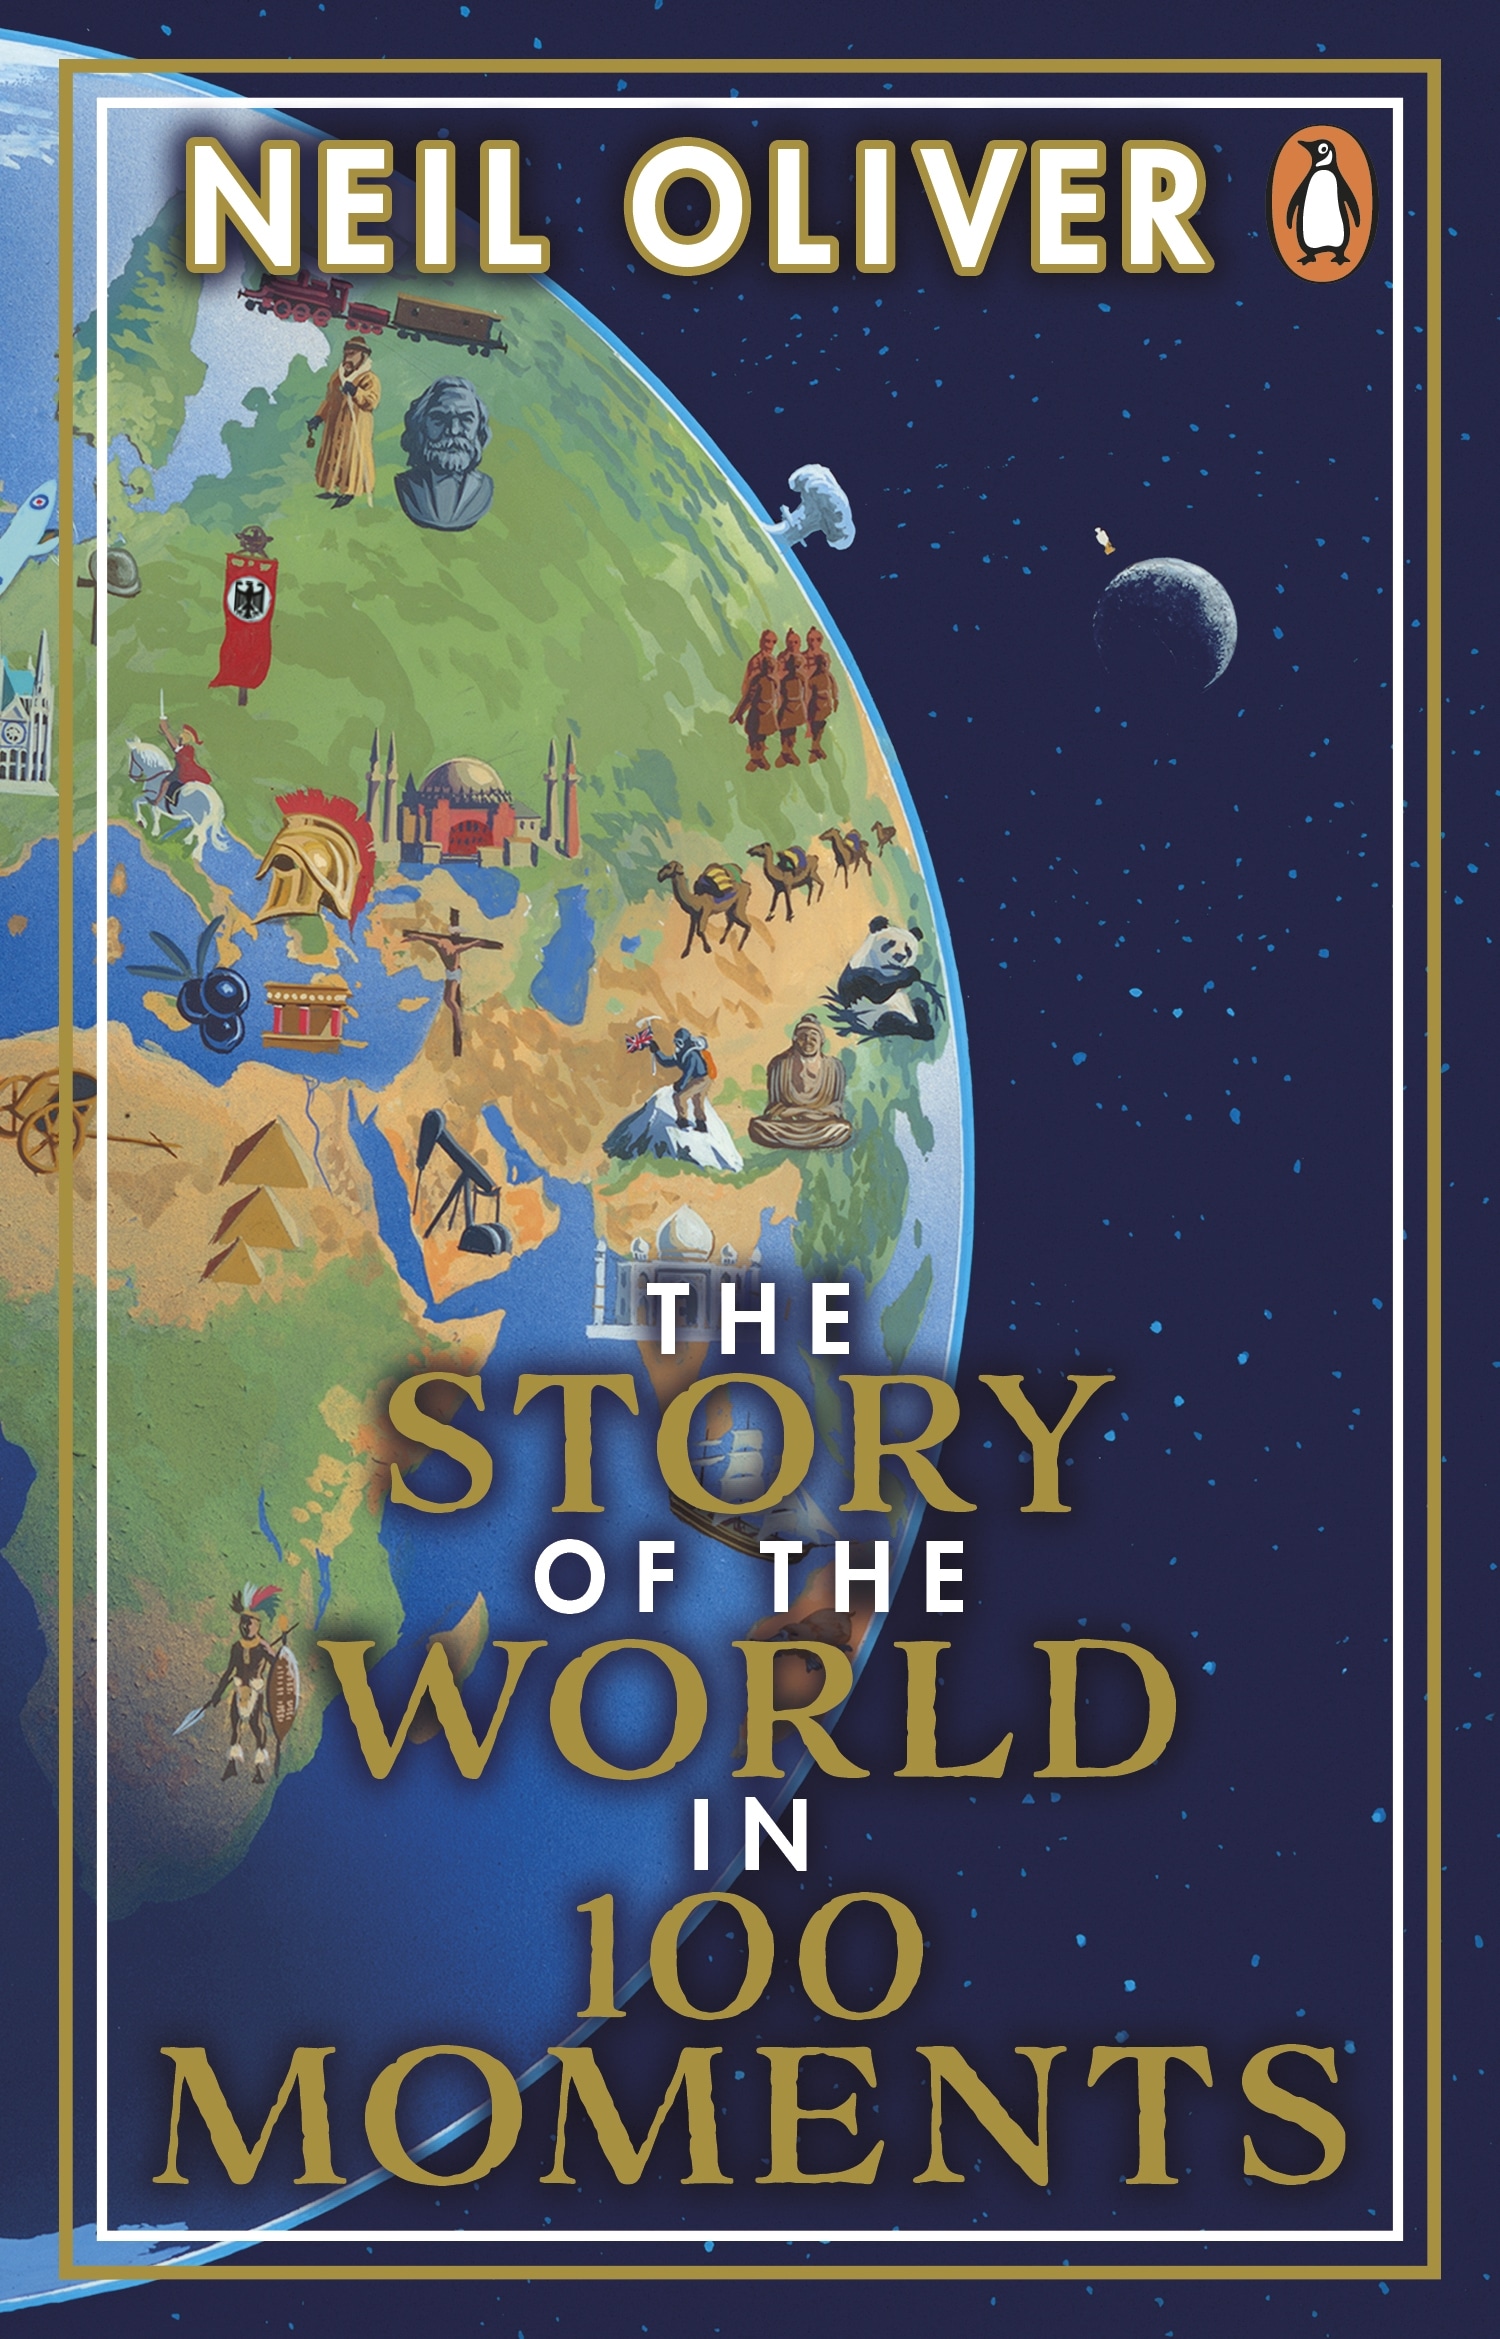 Book “The Story of the World in 100 Moments” by Neil Oliver — September 15, 2022